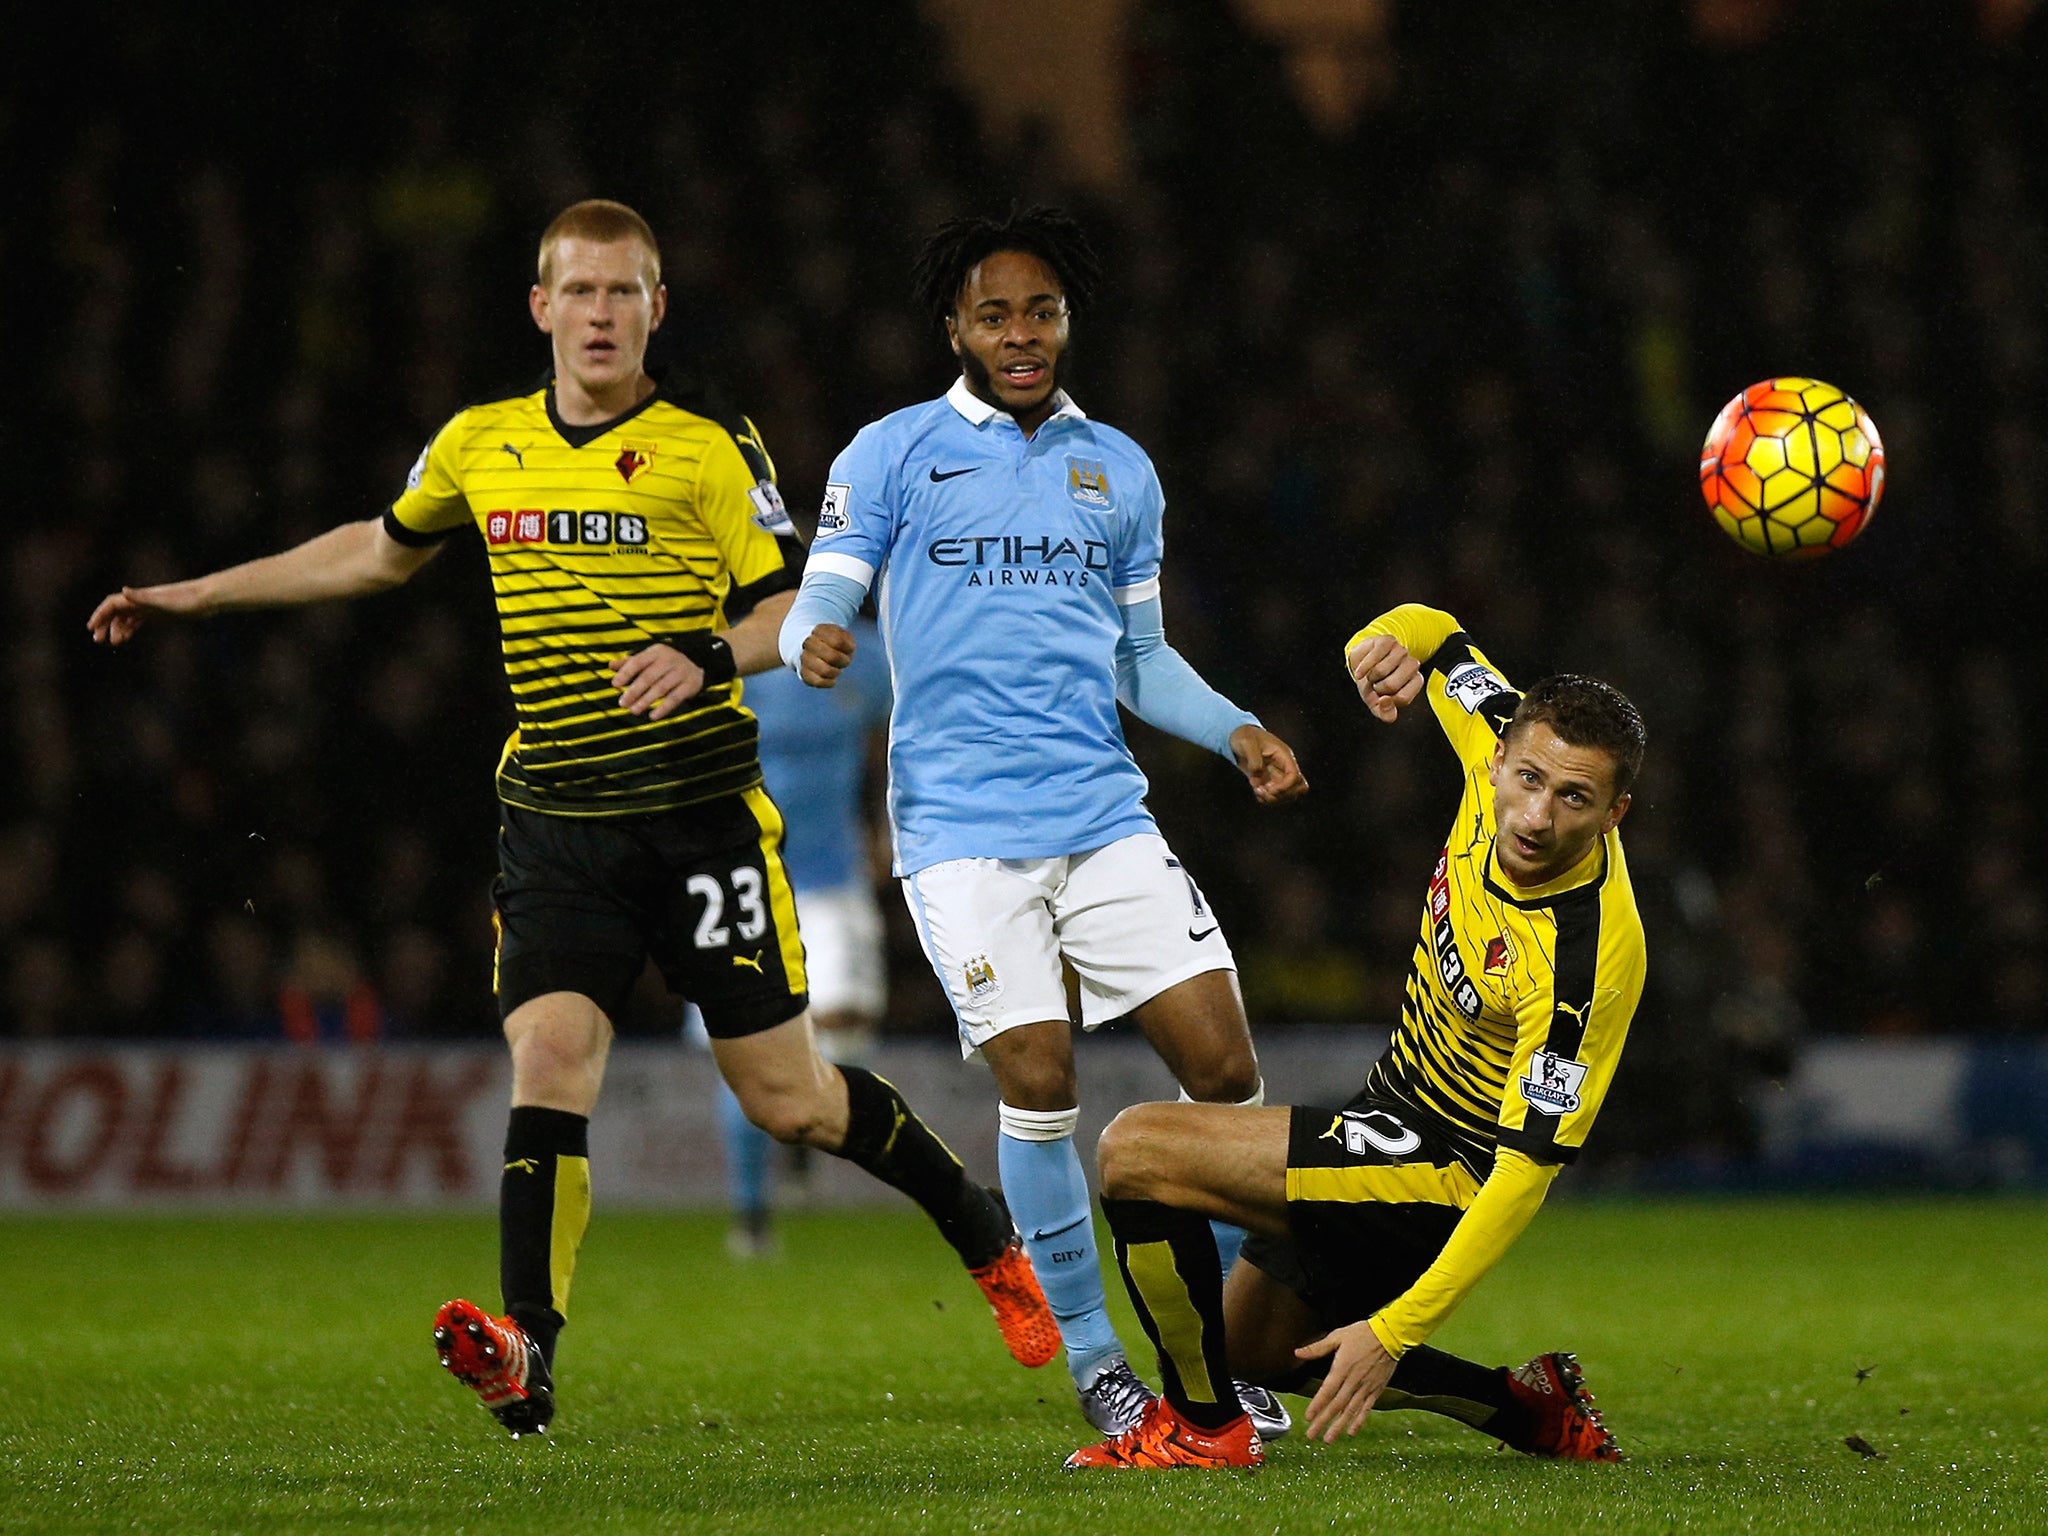 Manchester City's Raheem Sterling takes a shot